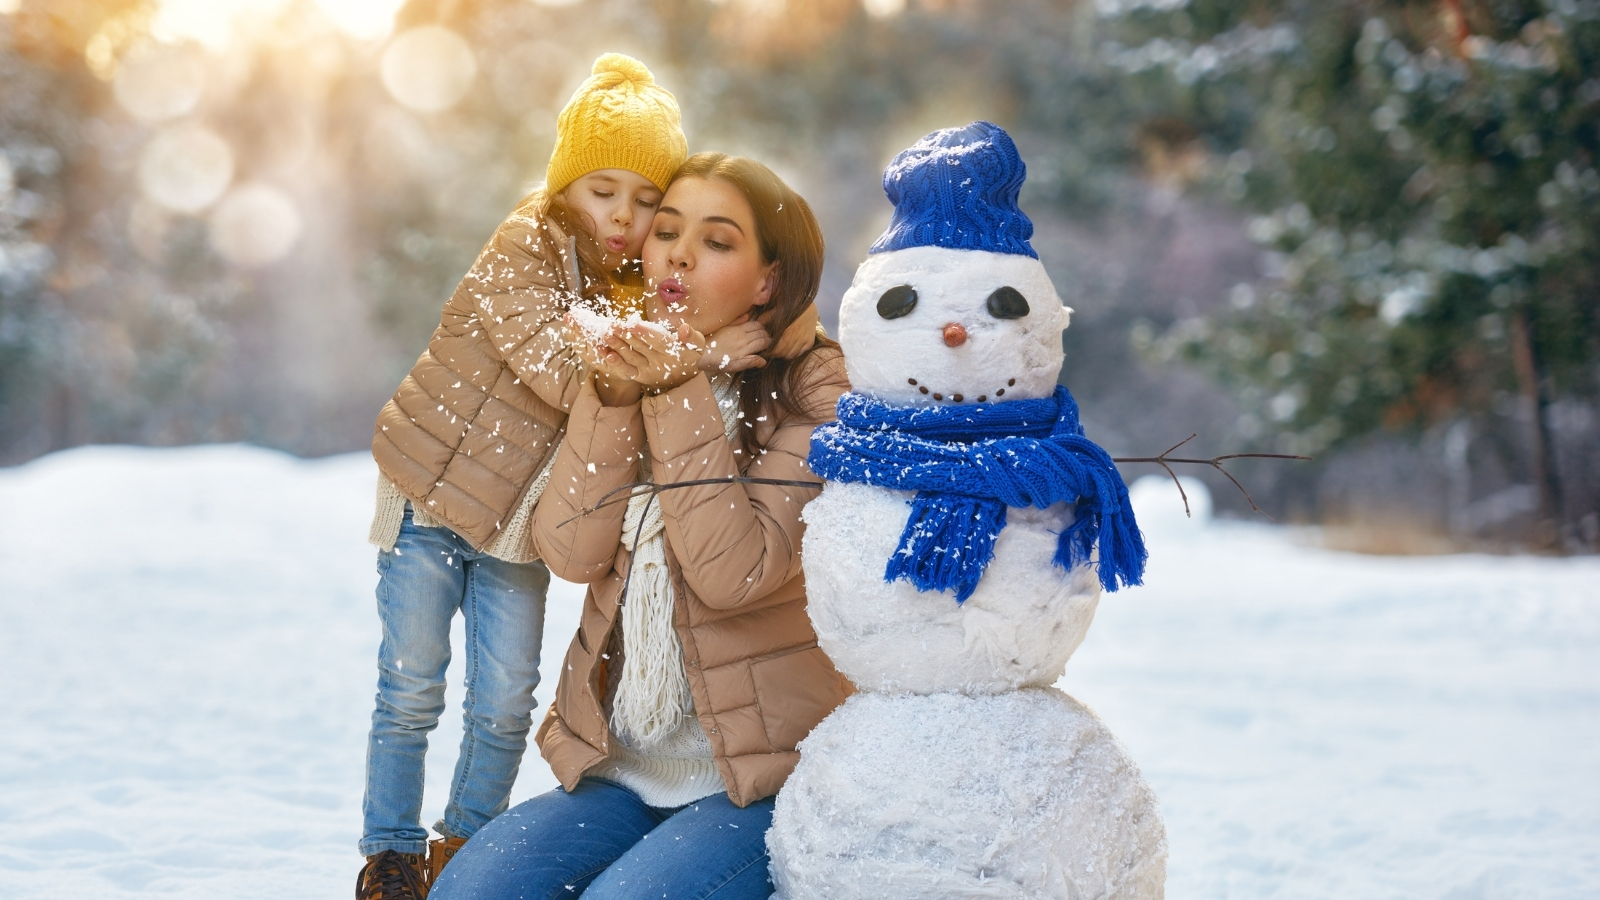 January activities: Easy ideas for happy moments with your kids